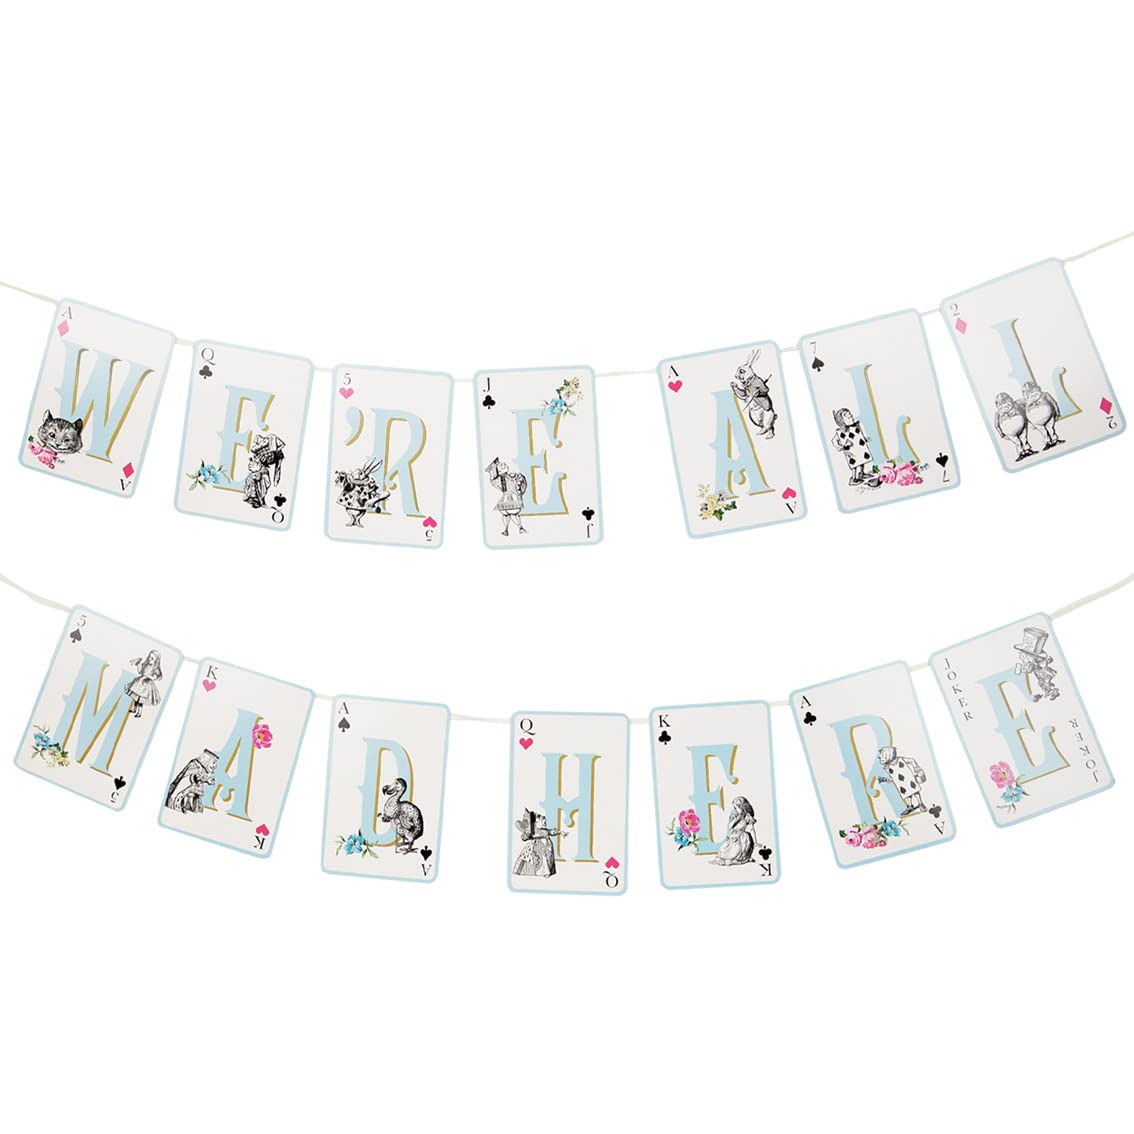 Alice in Wonderland Party Decorations - Mad Hatter Playing Cards Double-Sided Garland for Birthday Party, World Book Day, Paper, 3m Length - Made by Talking Tables